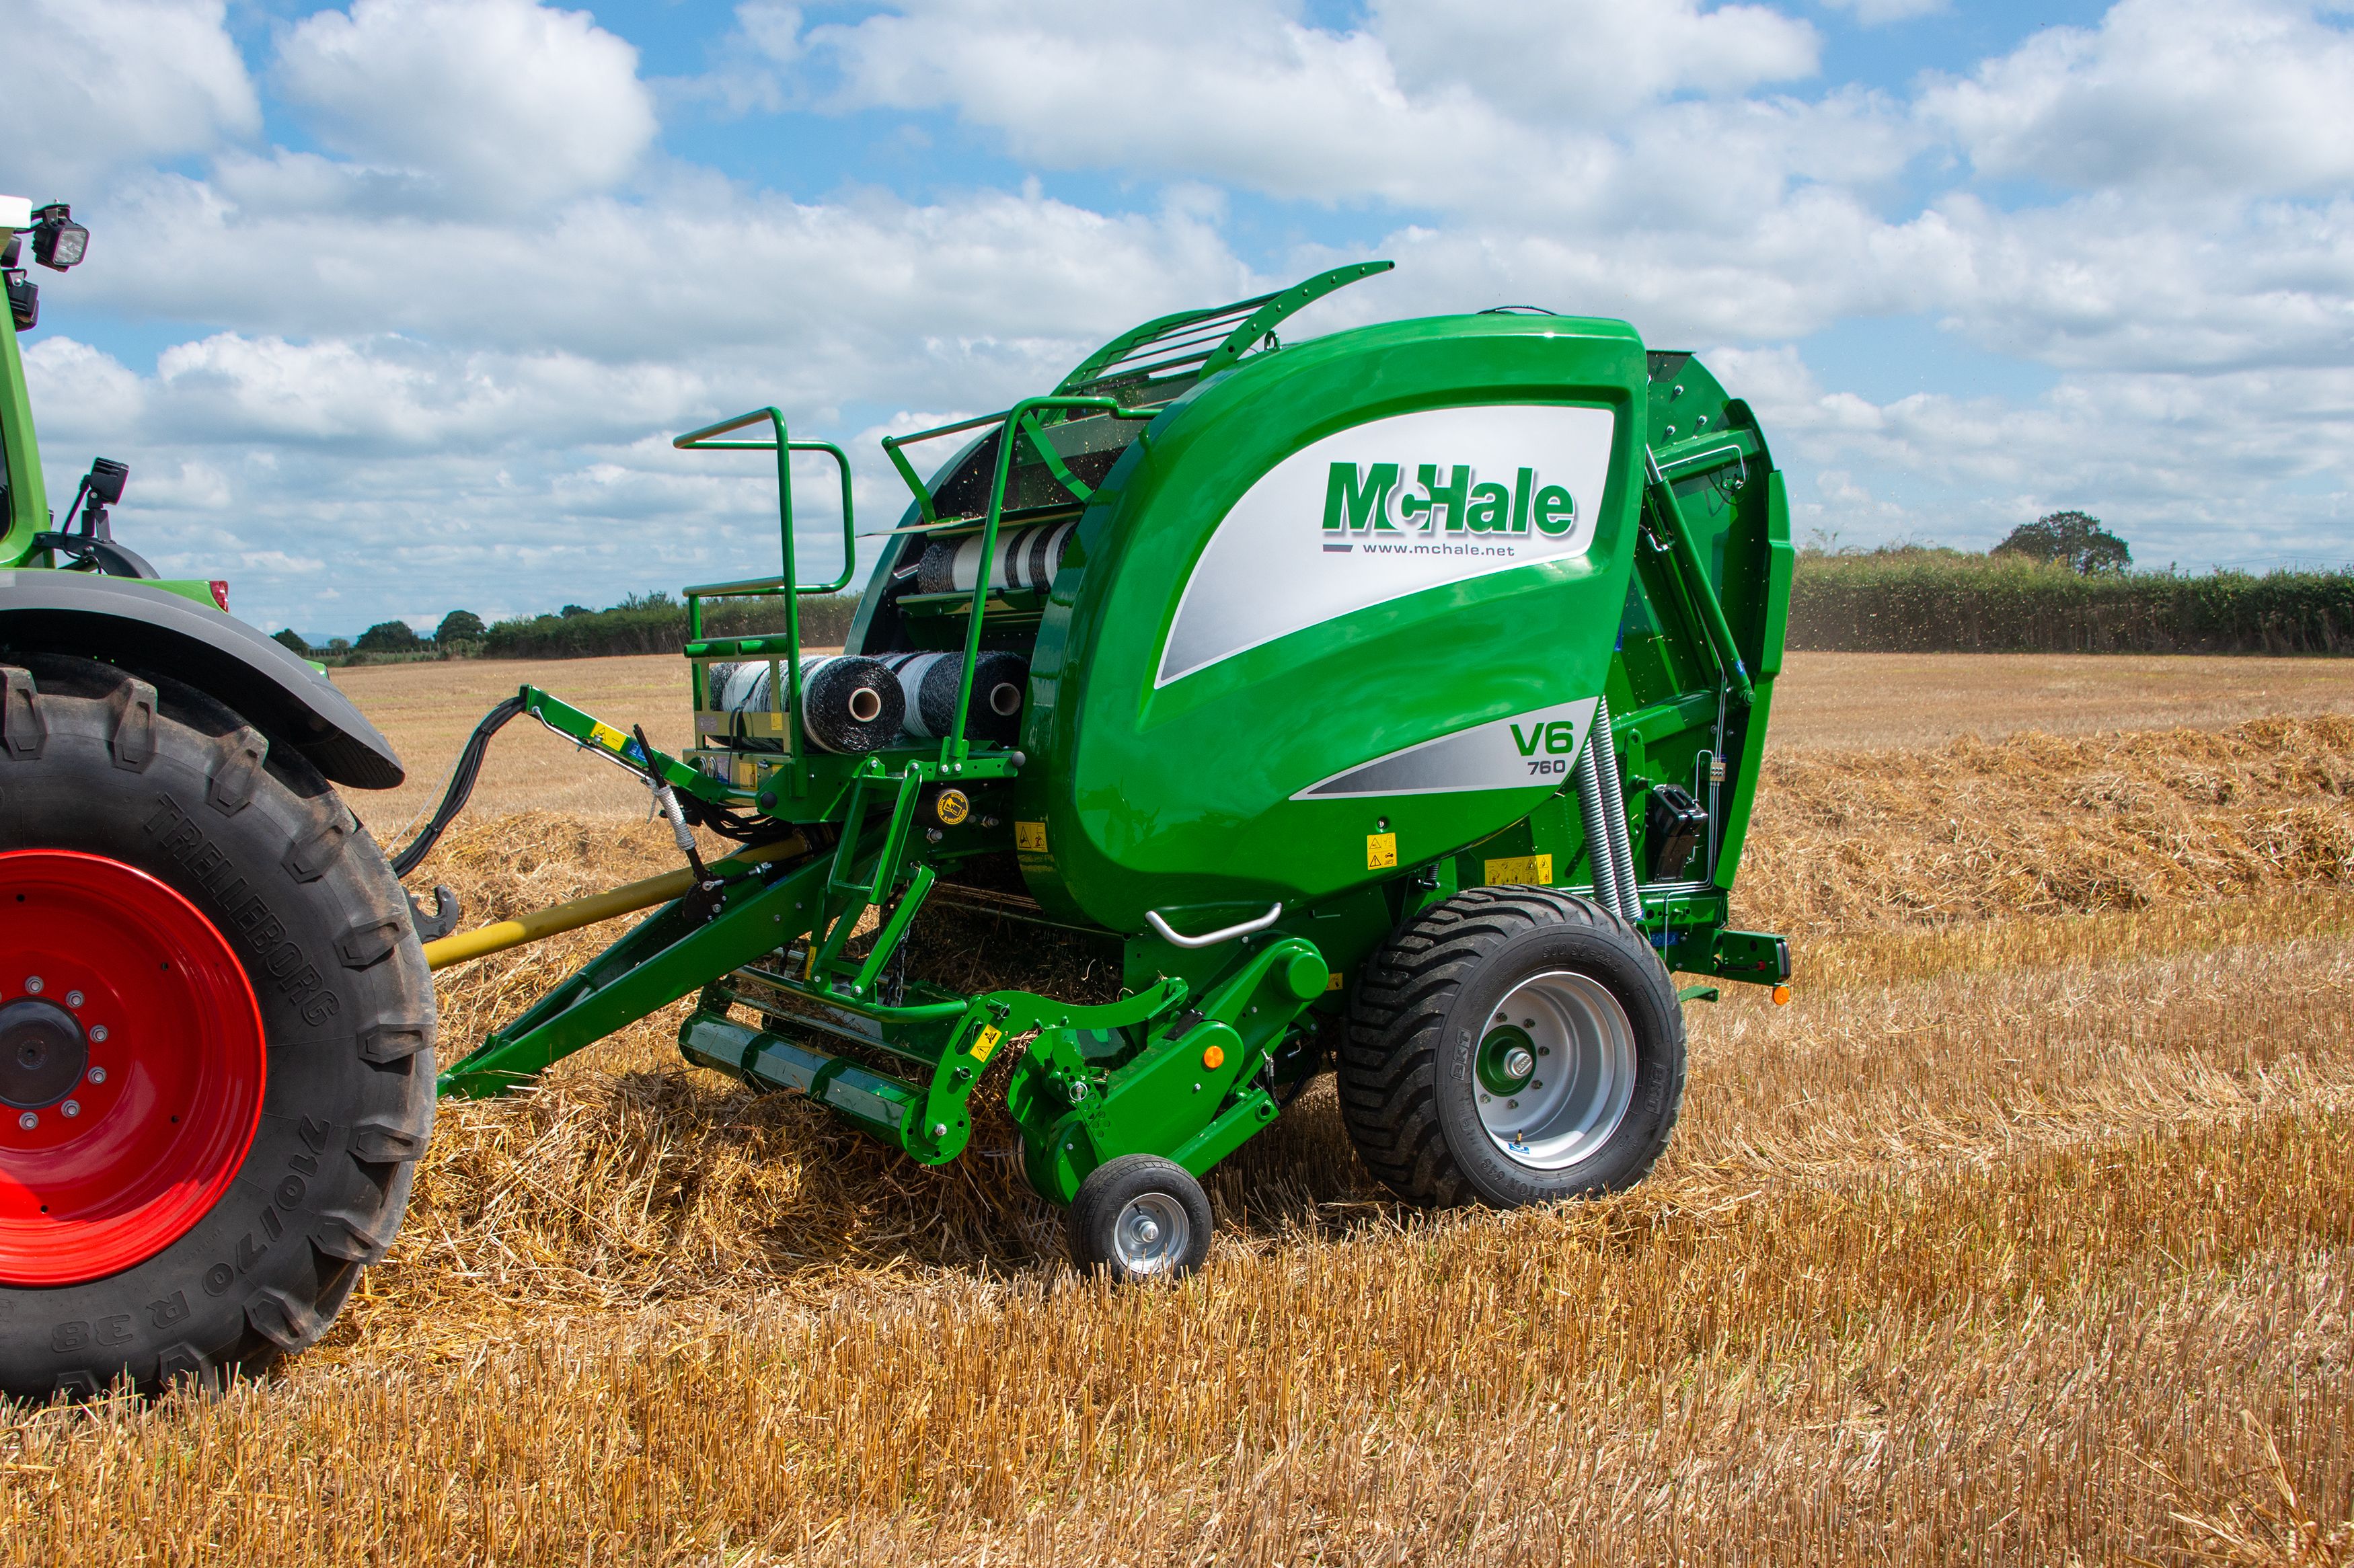 McHale V6760 Fully Automatic Variable Chamber Baler